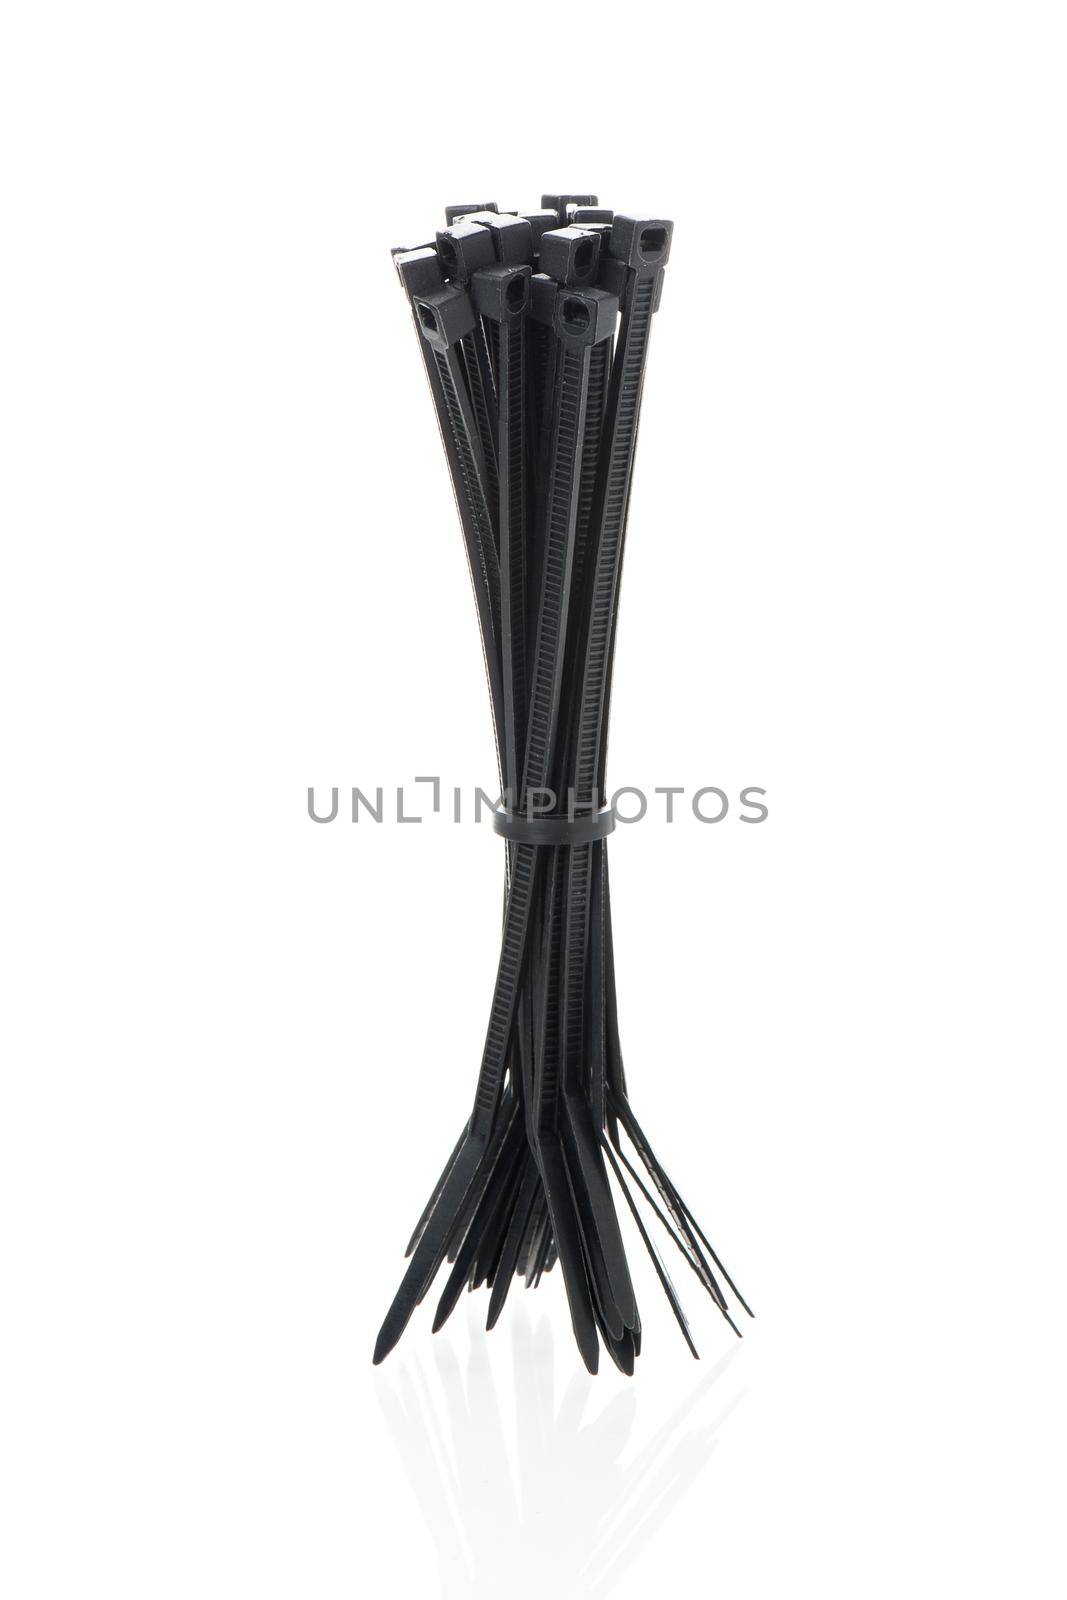 heap of black cable ties on white background